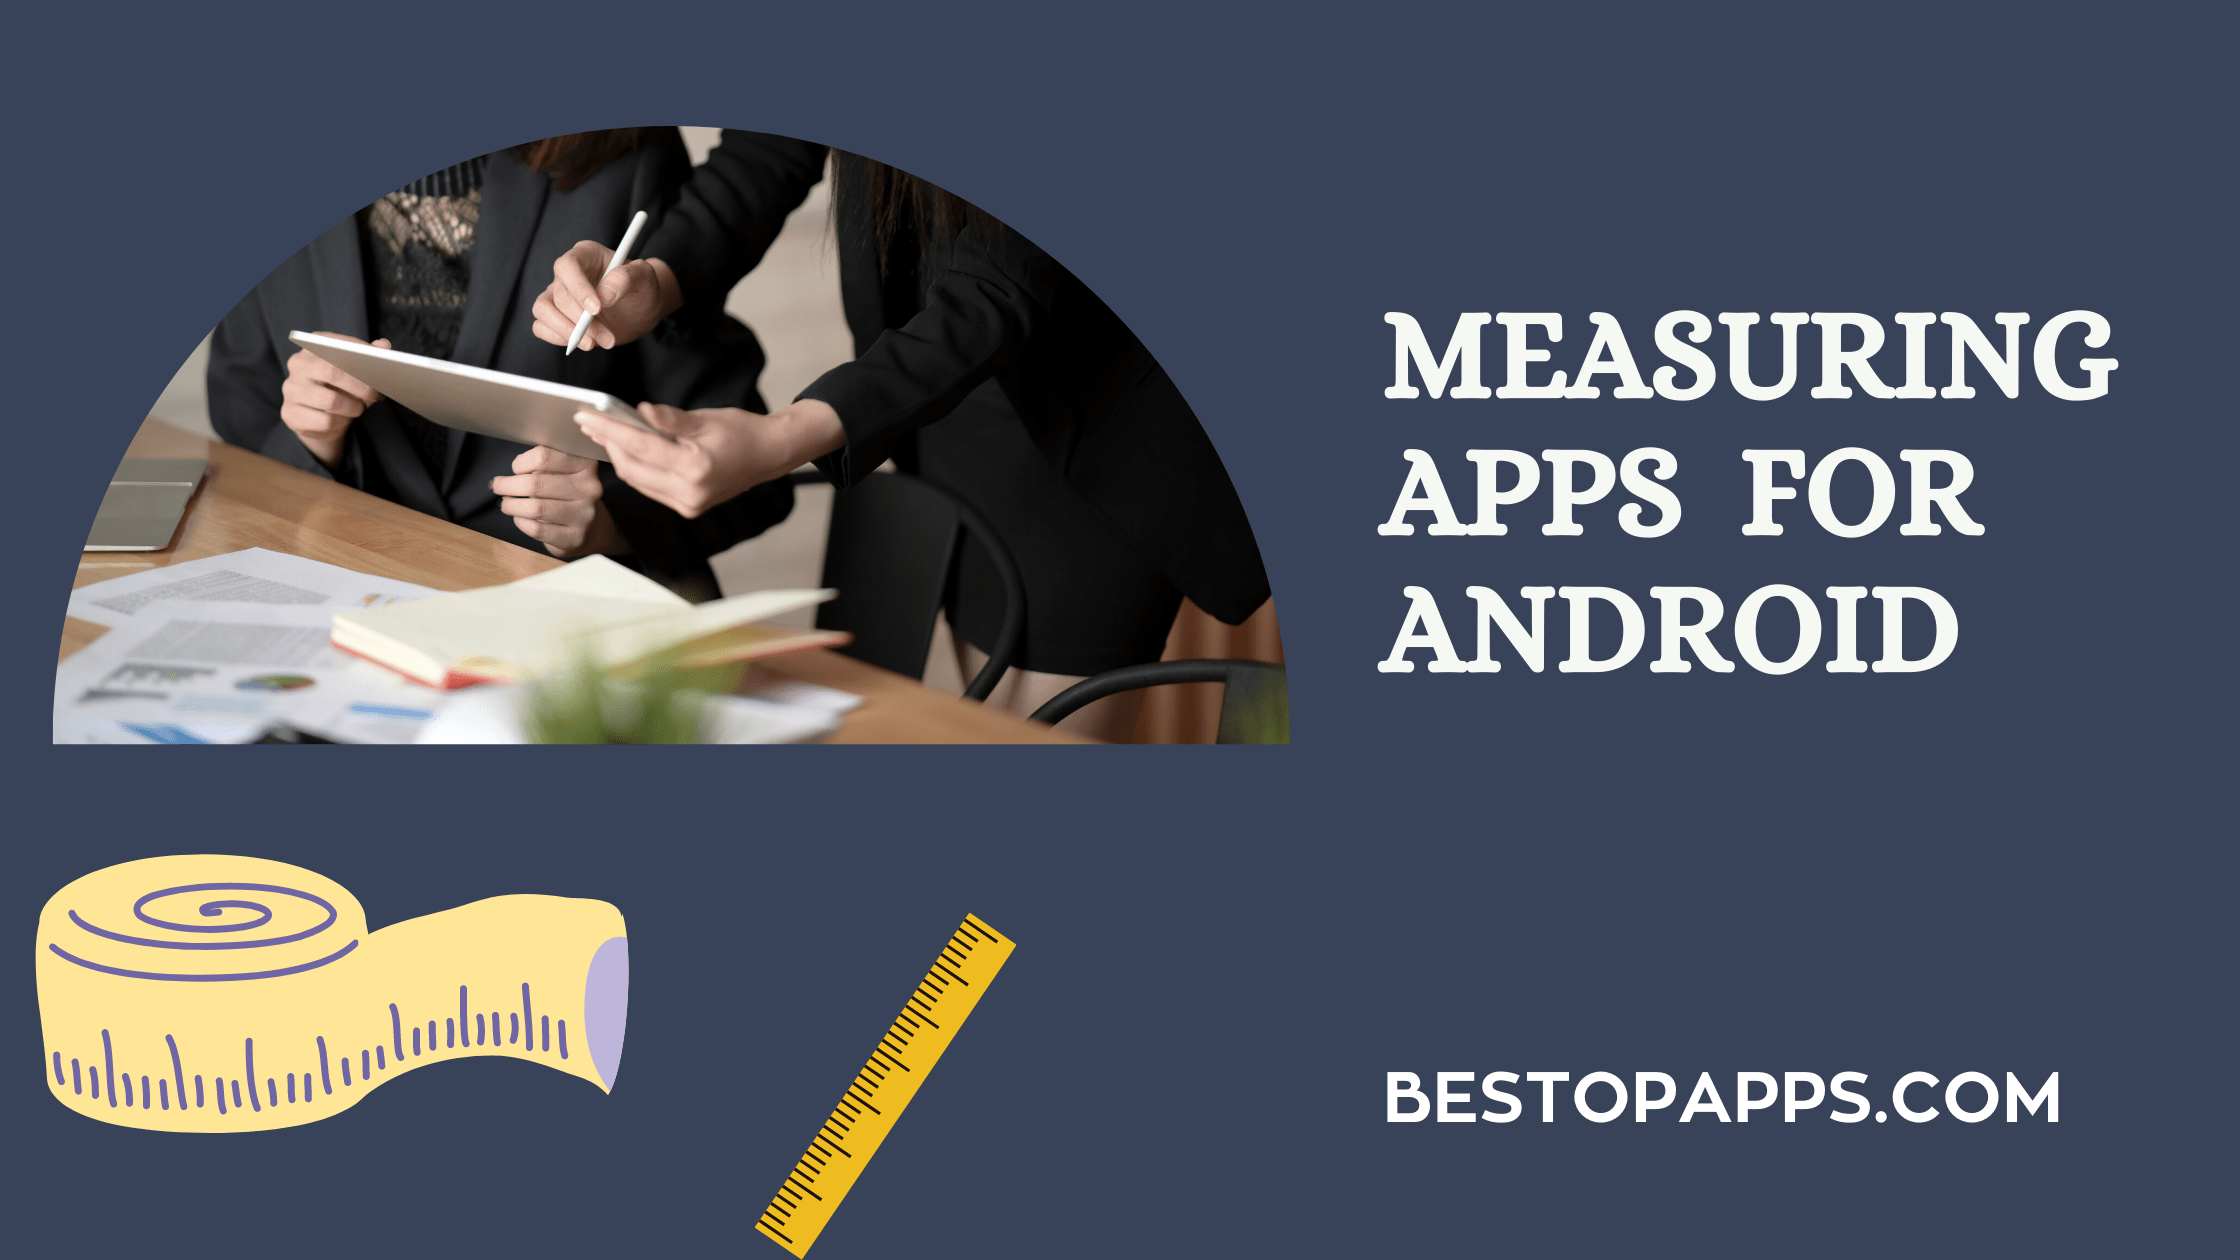 Measuring apps for android